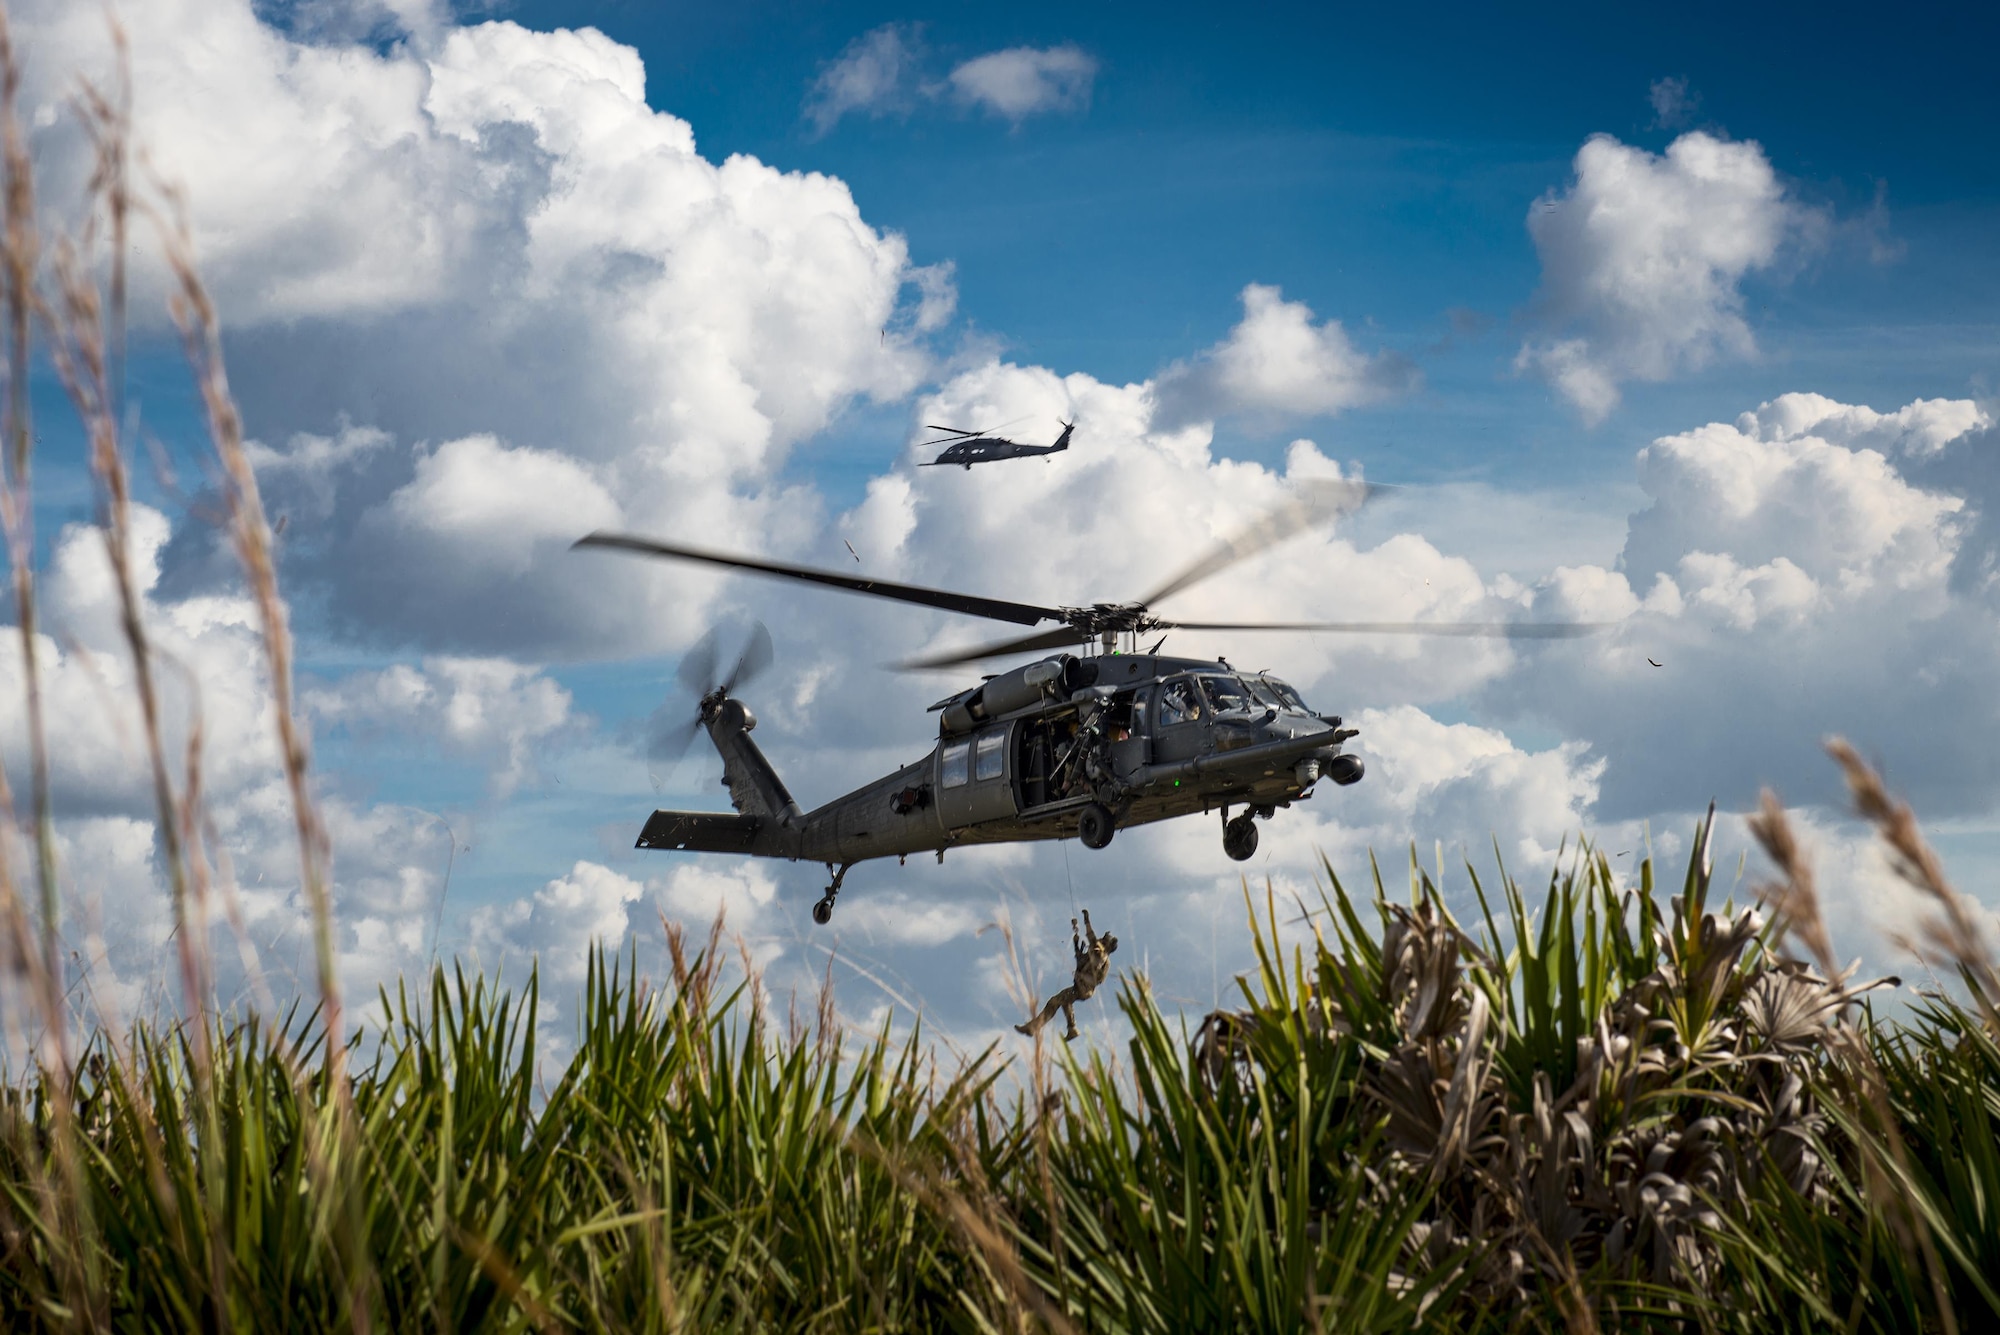 A pararescueman from the 38th Rescue Squadron rides a hoist back into a 41st RQS HH-60G Pave Hawk during a ‘spin-up’ exercise, Dec. 13, 2016, at Avon Park Air Force Range, Florida. Avon Park AFR serves as an air and ground training complex for the military. To mitigate the risk of an uncontrolled wildfire during times of drought, the Avon Park Wildland Support Module works year round employing prescribed burns and other wildland management tools. The WSM is part of the Air Force Wildland Fire Center, a mission of the Air Force Civil Engineer Center’s Environmental Management Directorate at Joint Base San Antonio-Lackland, Texas. (U.S. Air Force photo by Staff Sgt. Ryan Callaghan) 